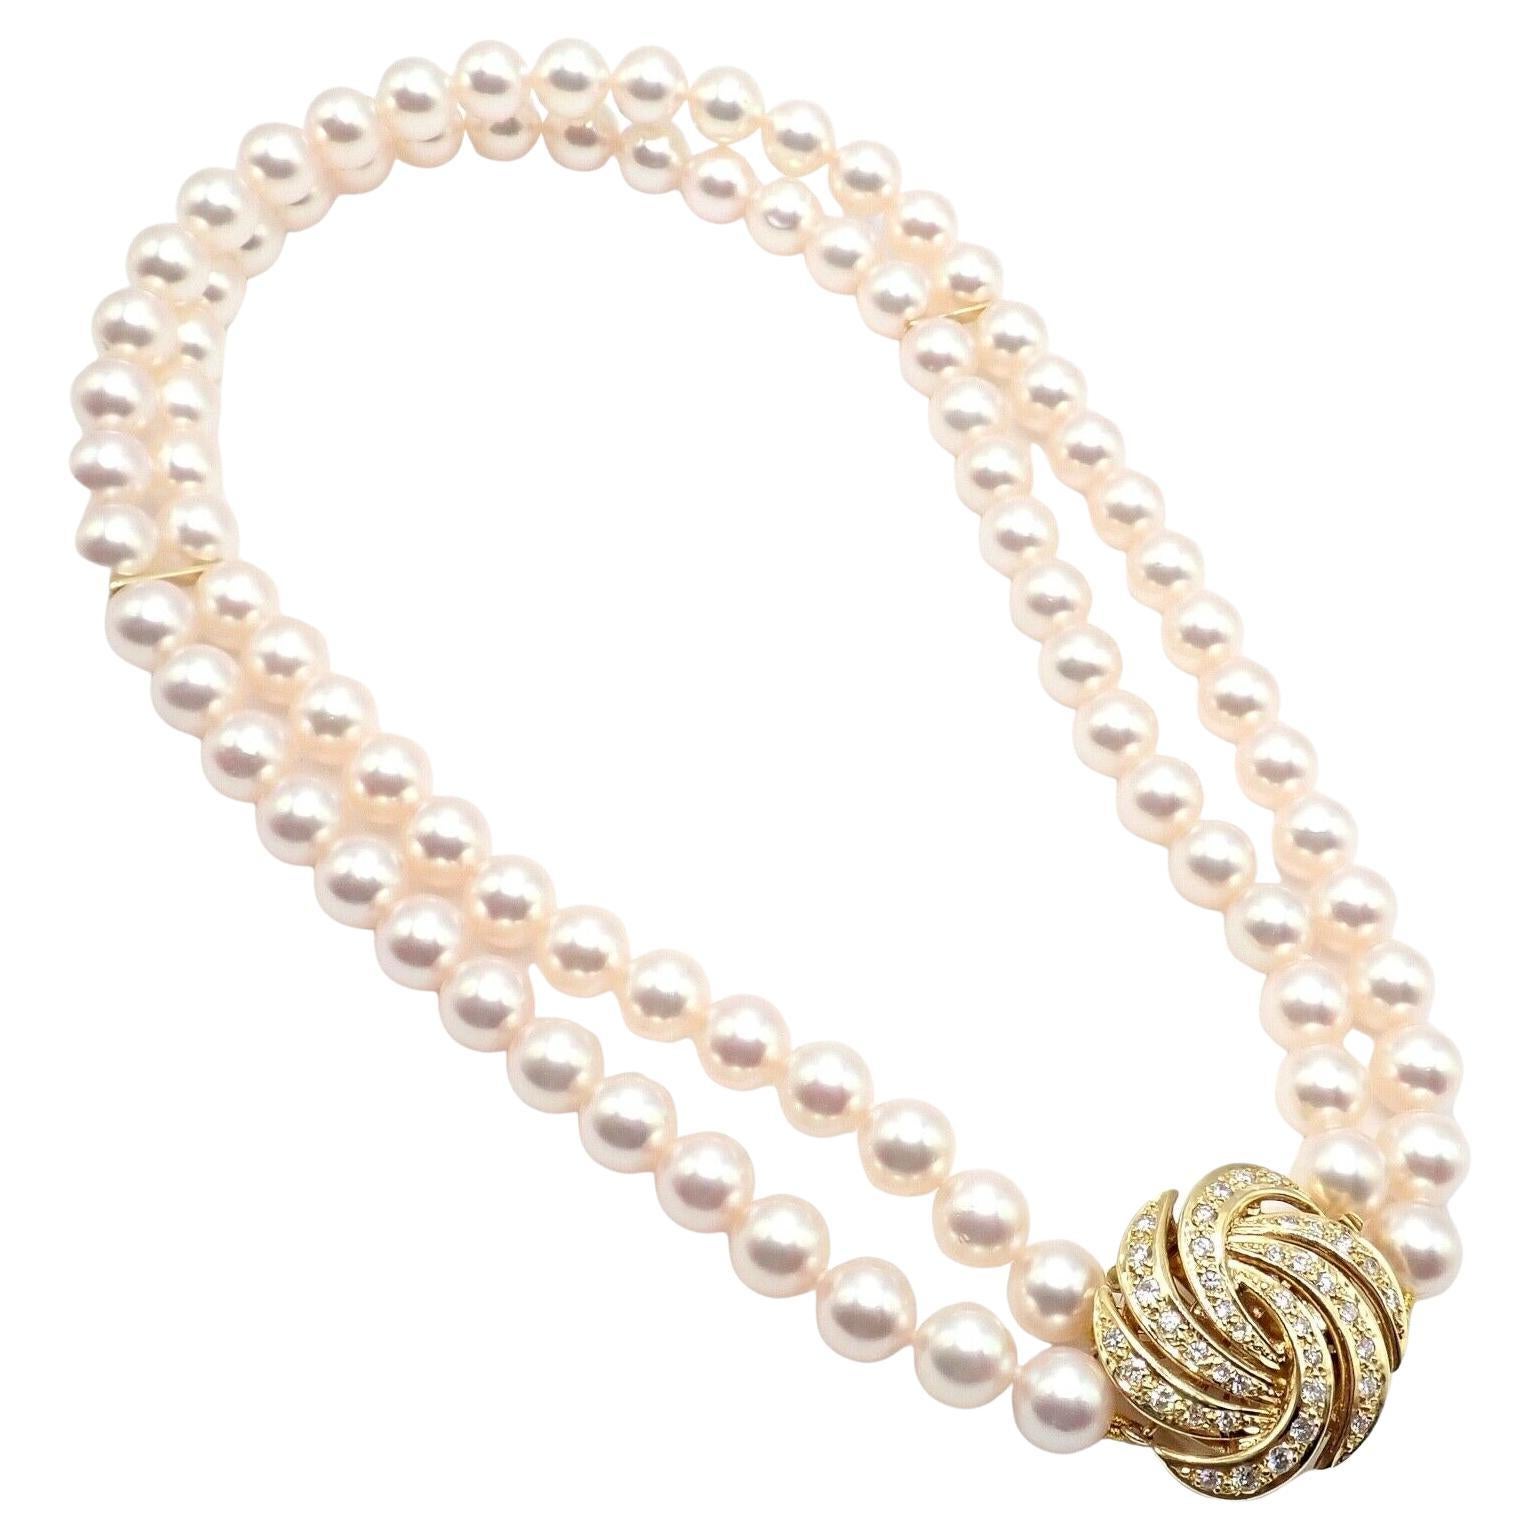 How do I tell if pearl jewelry is Mikimoto?